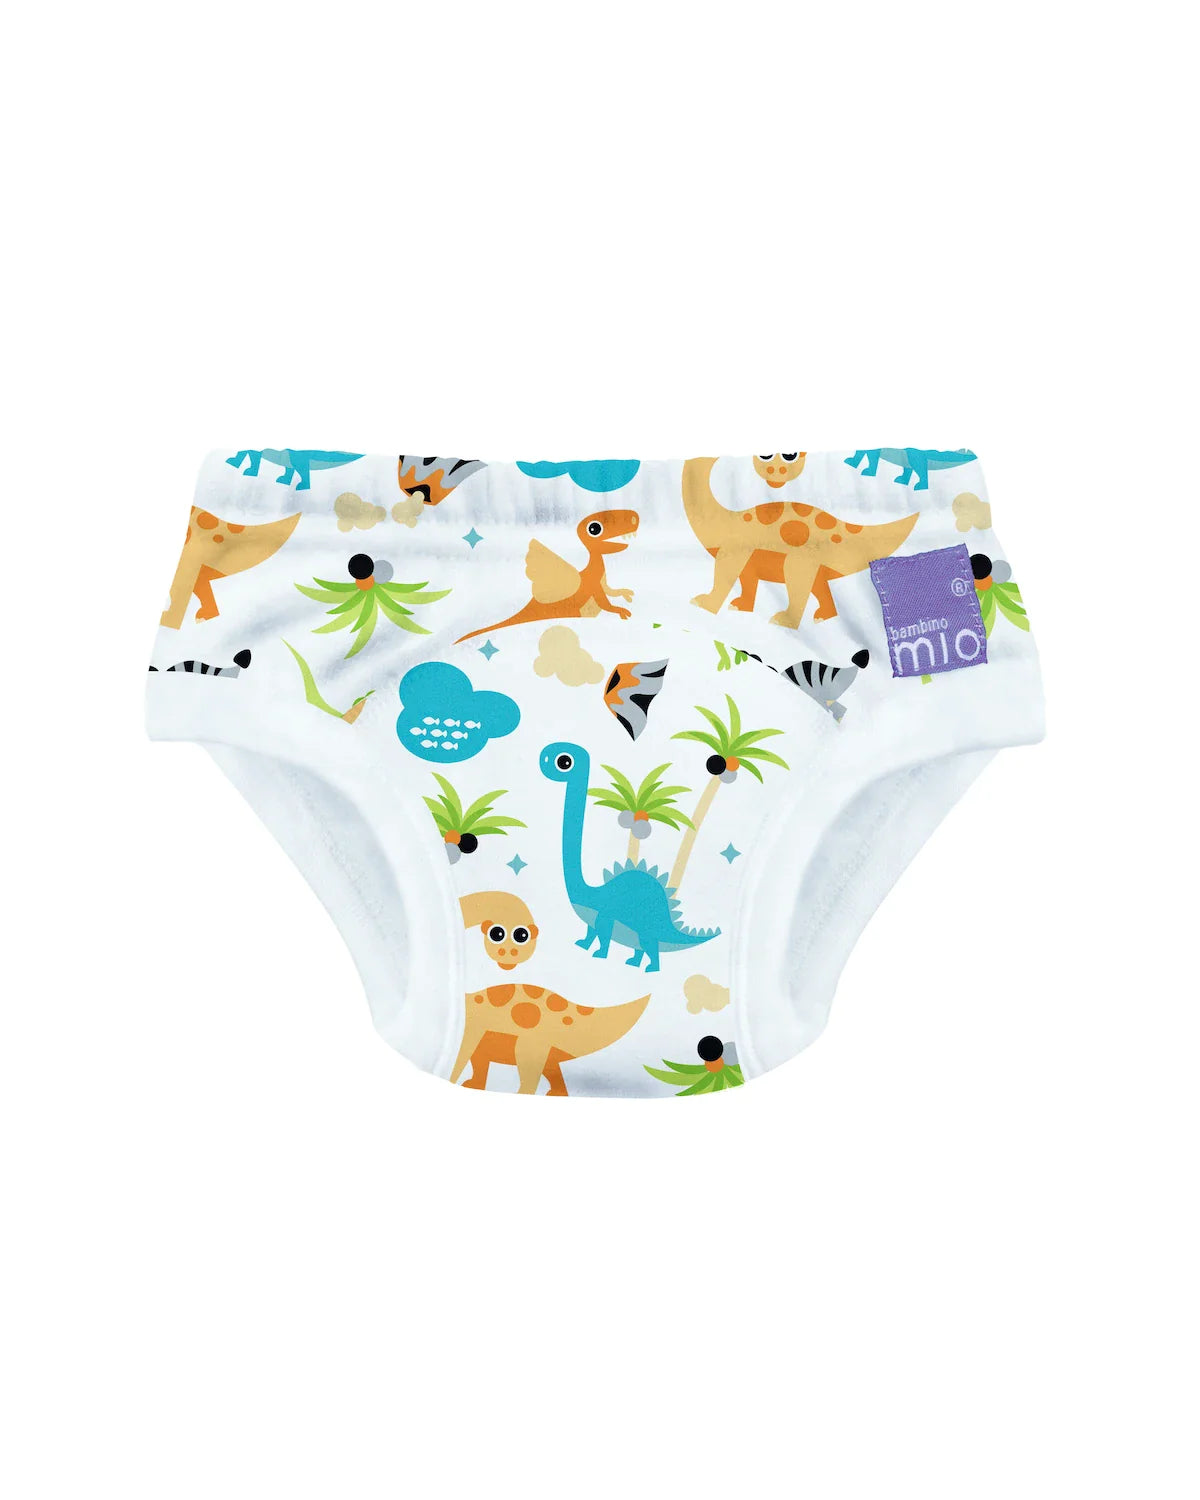  Bambino mio, Potty training underwear for girls and boys,  18-24 months : Baby